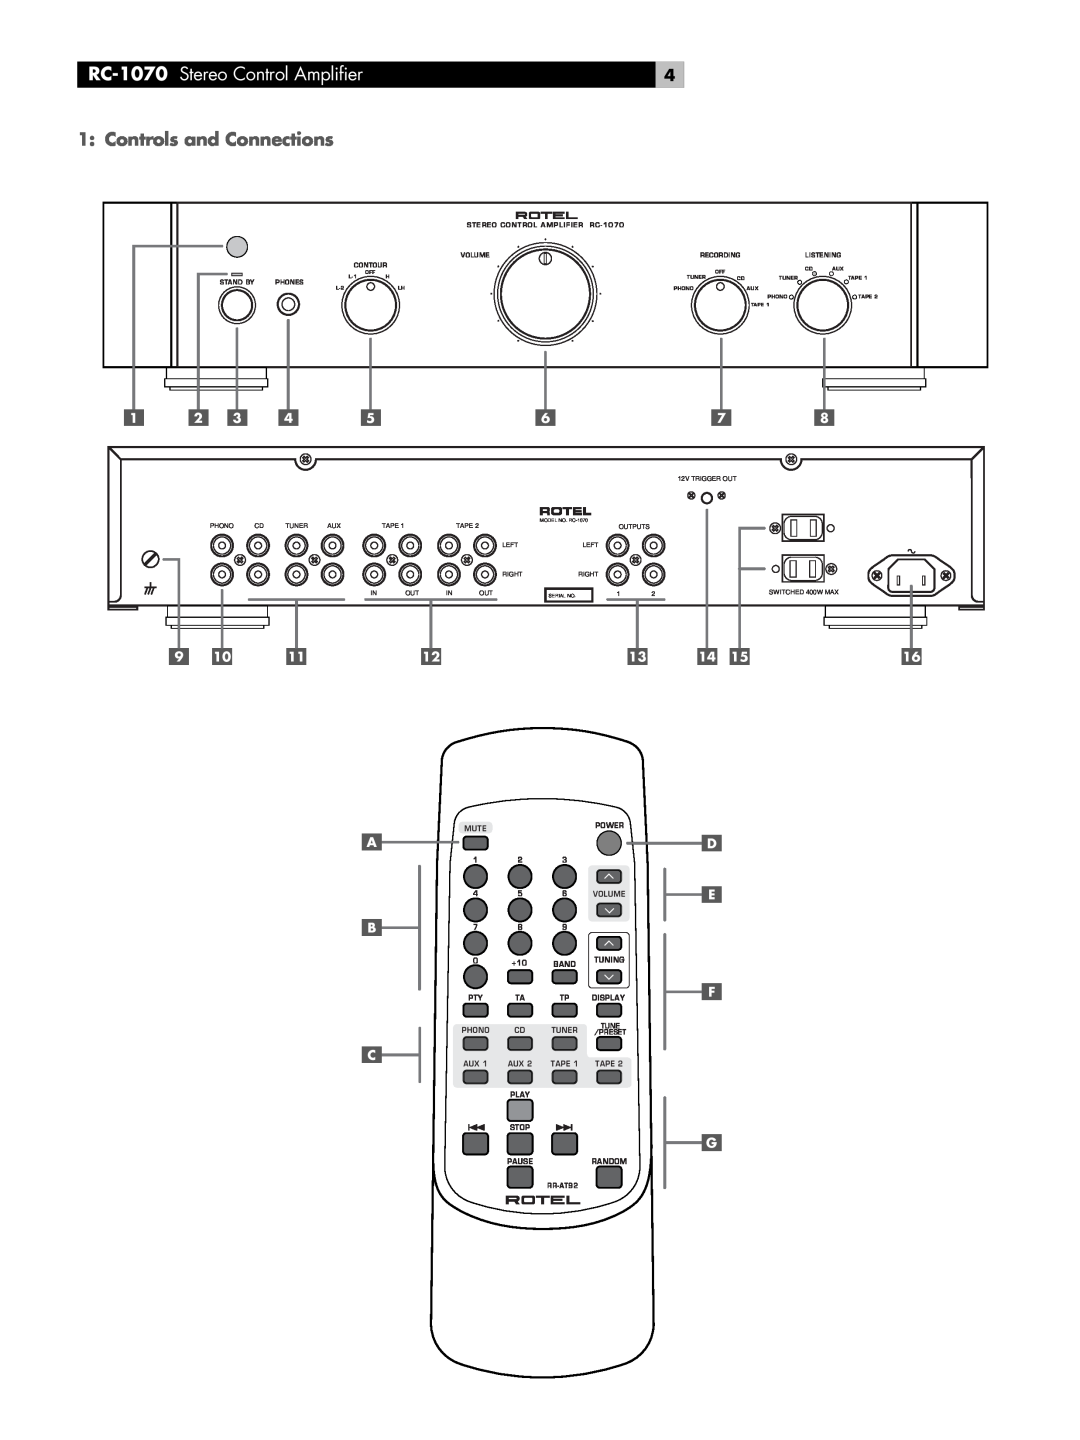 Rotel owner manual RC-1070 Stereo Control Amplifier, Controls and Connections, A B C, D E F G 